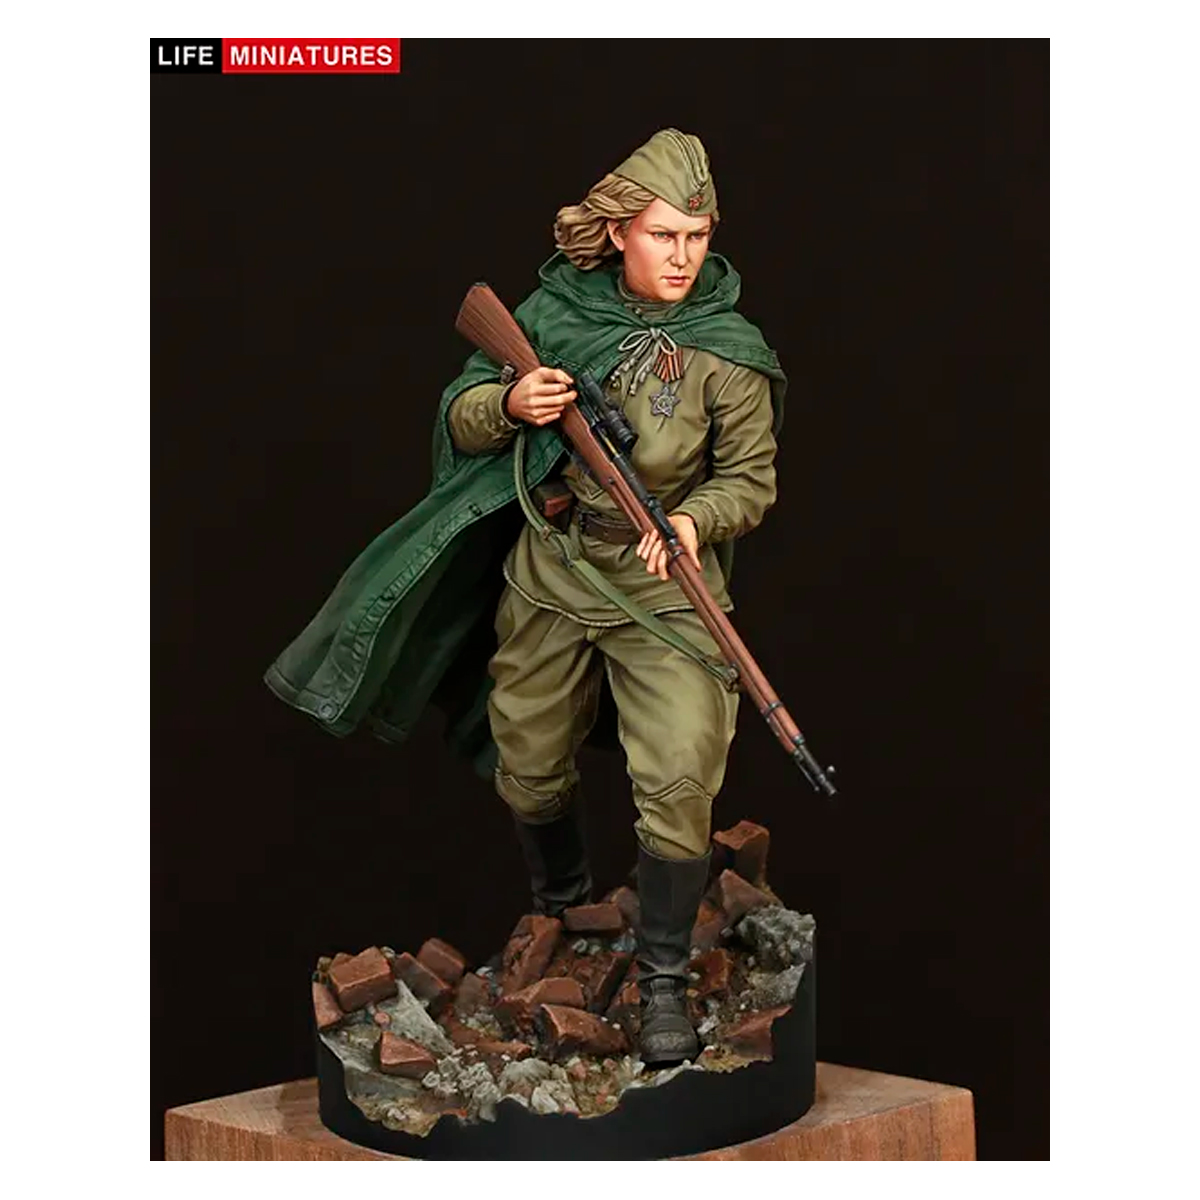 Life Miniatures – WW2 RED ARMY FEMALE SNIPER (1/35 scale)